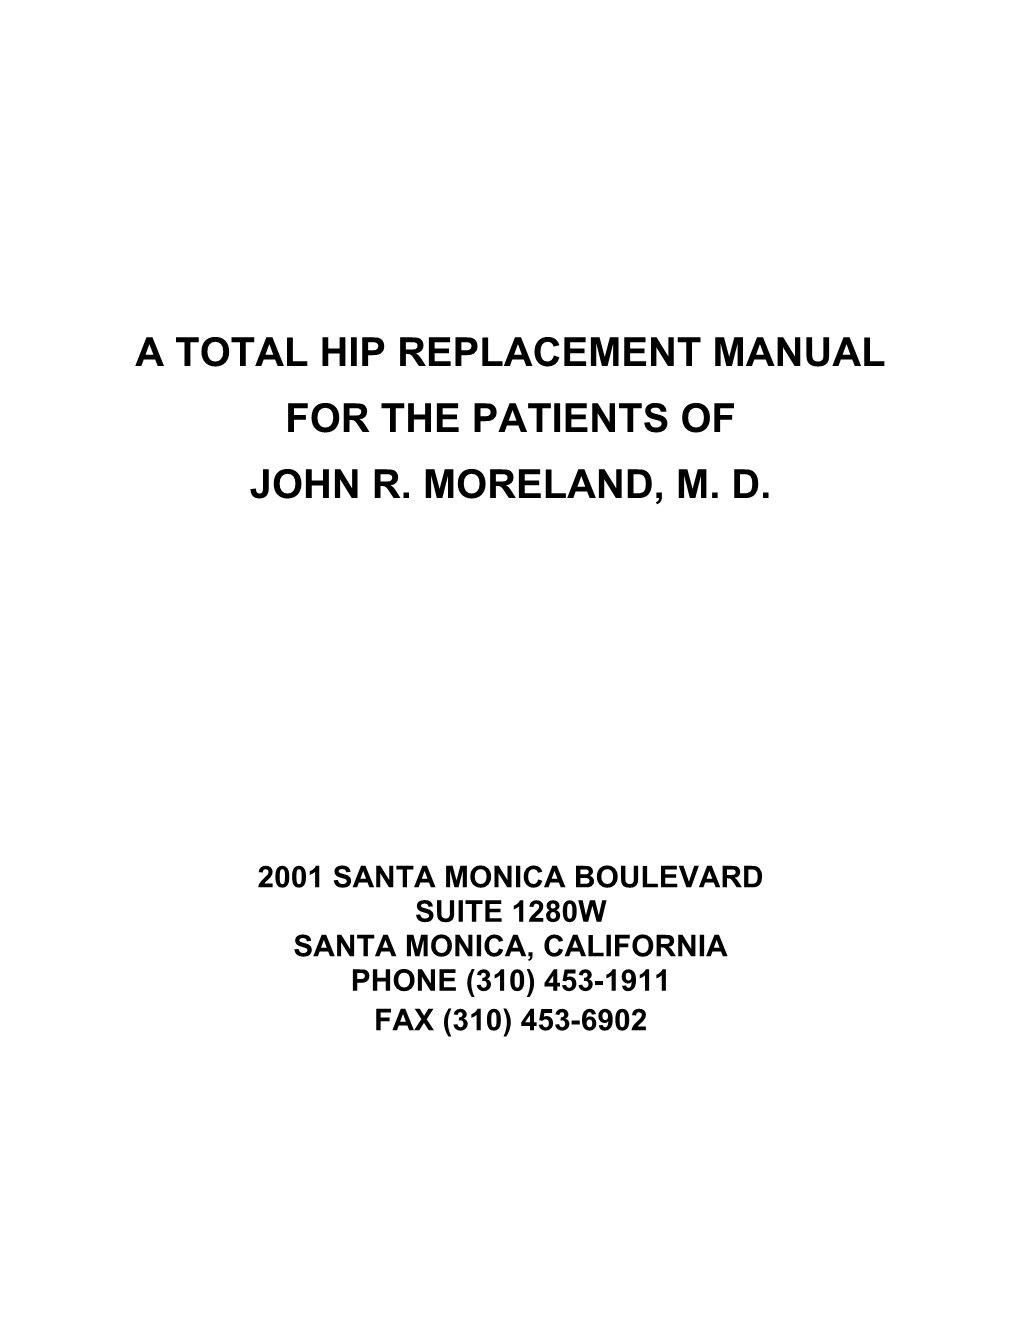 A TOTAL Hip Replacement Manual